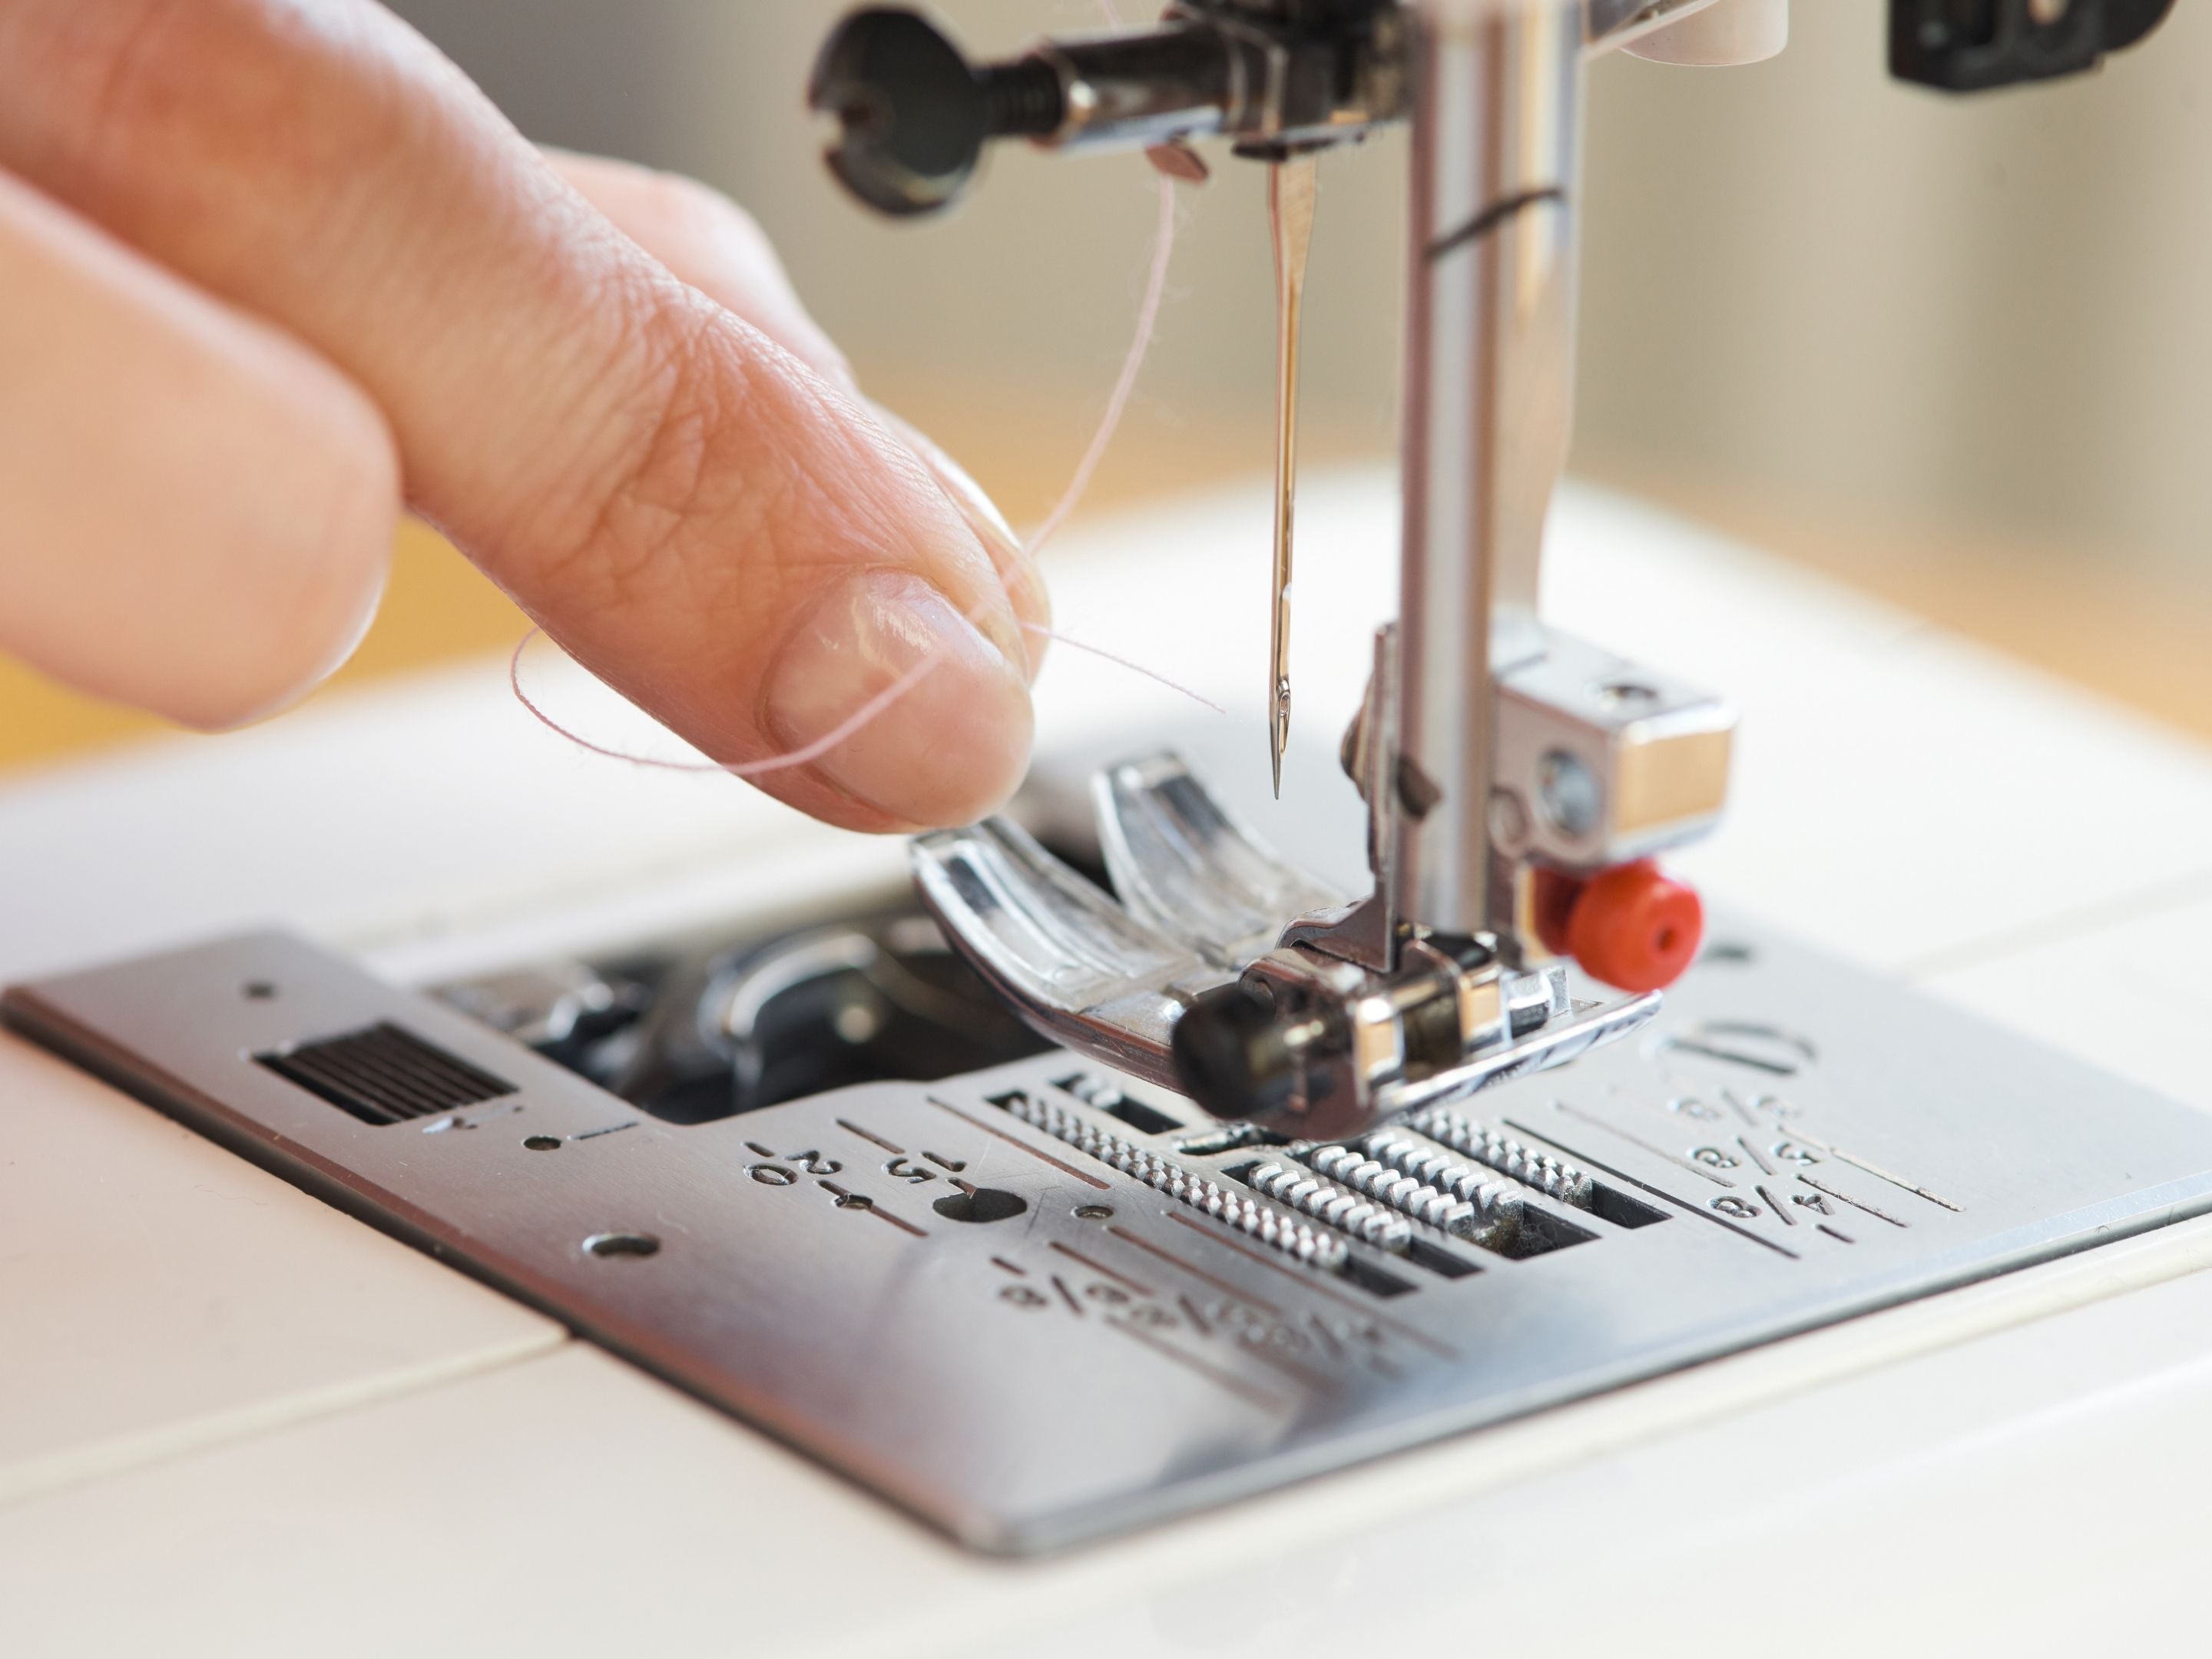 How to choose the correct sewing machine needle - New Forest Fabrics